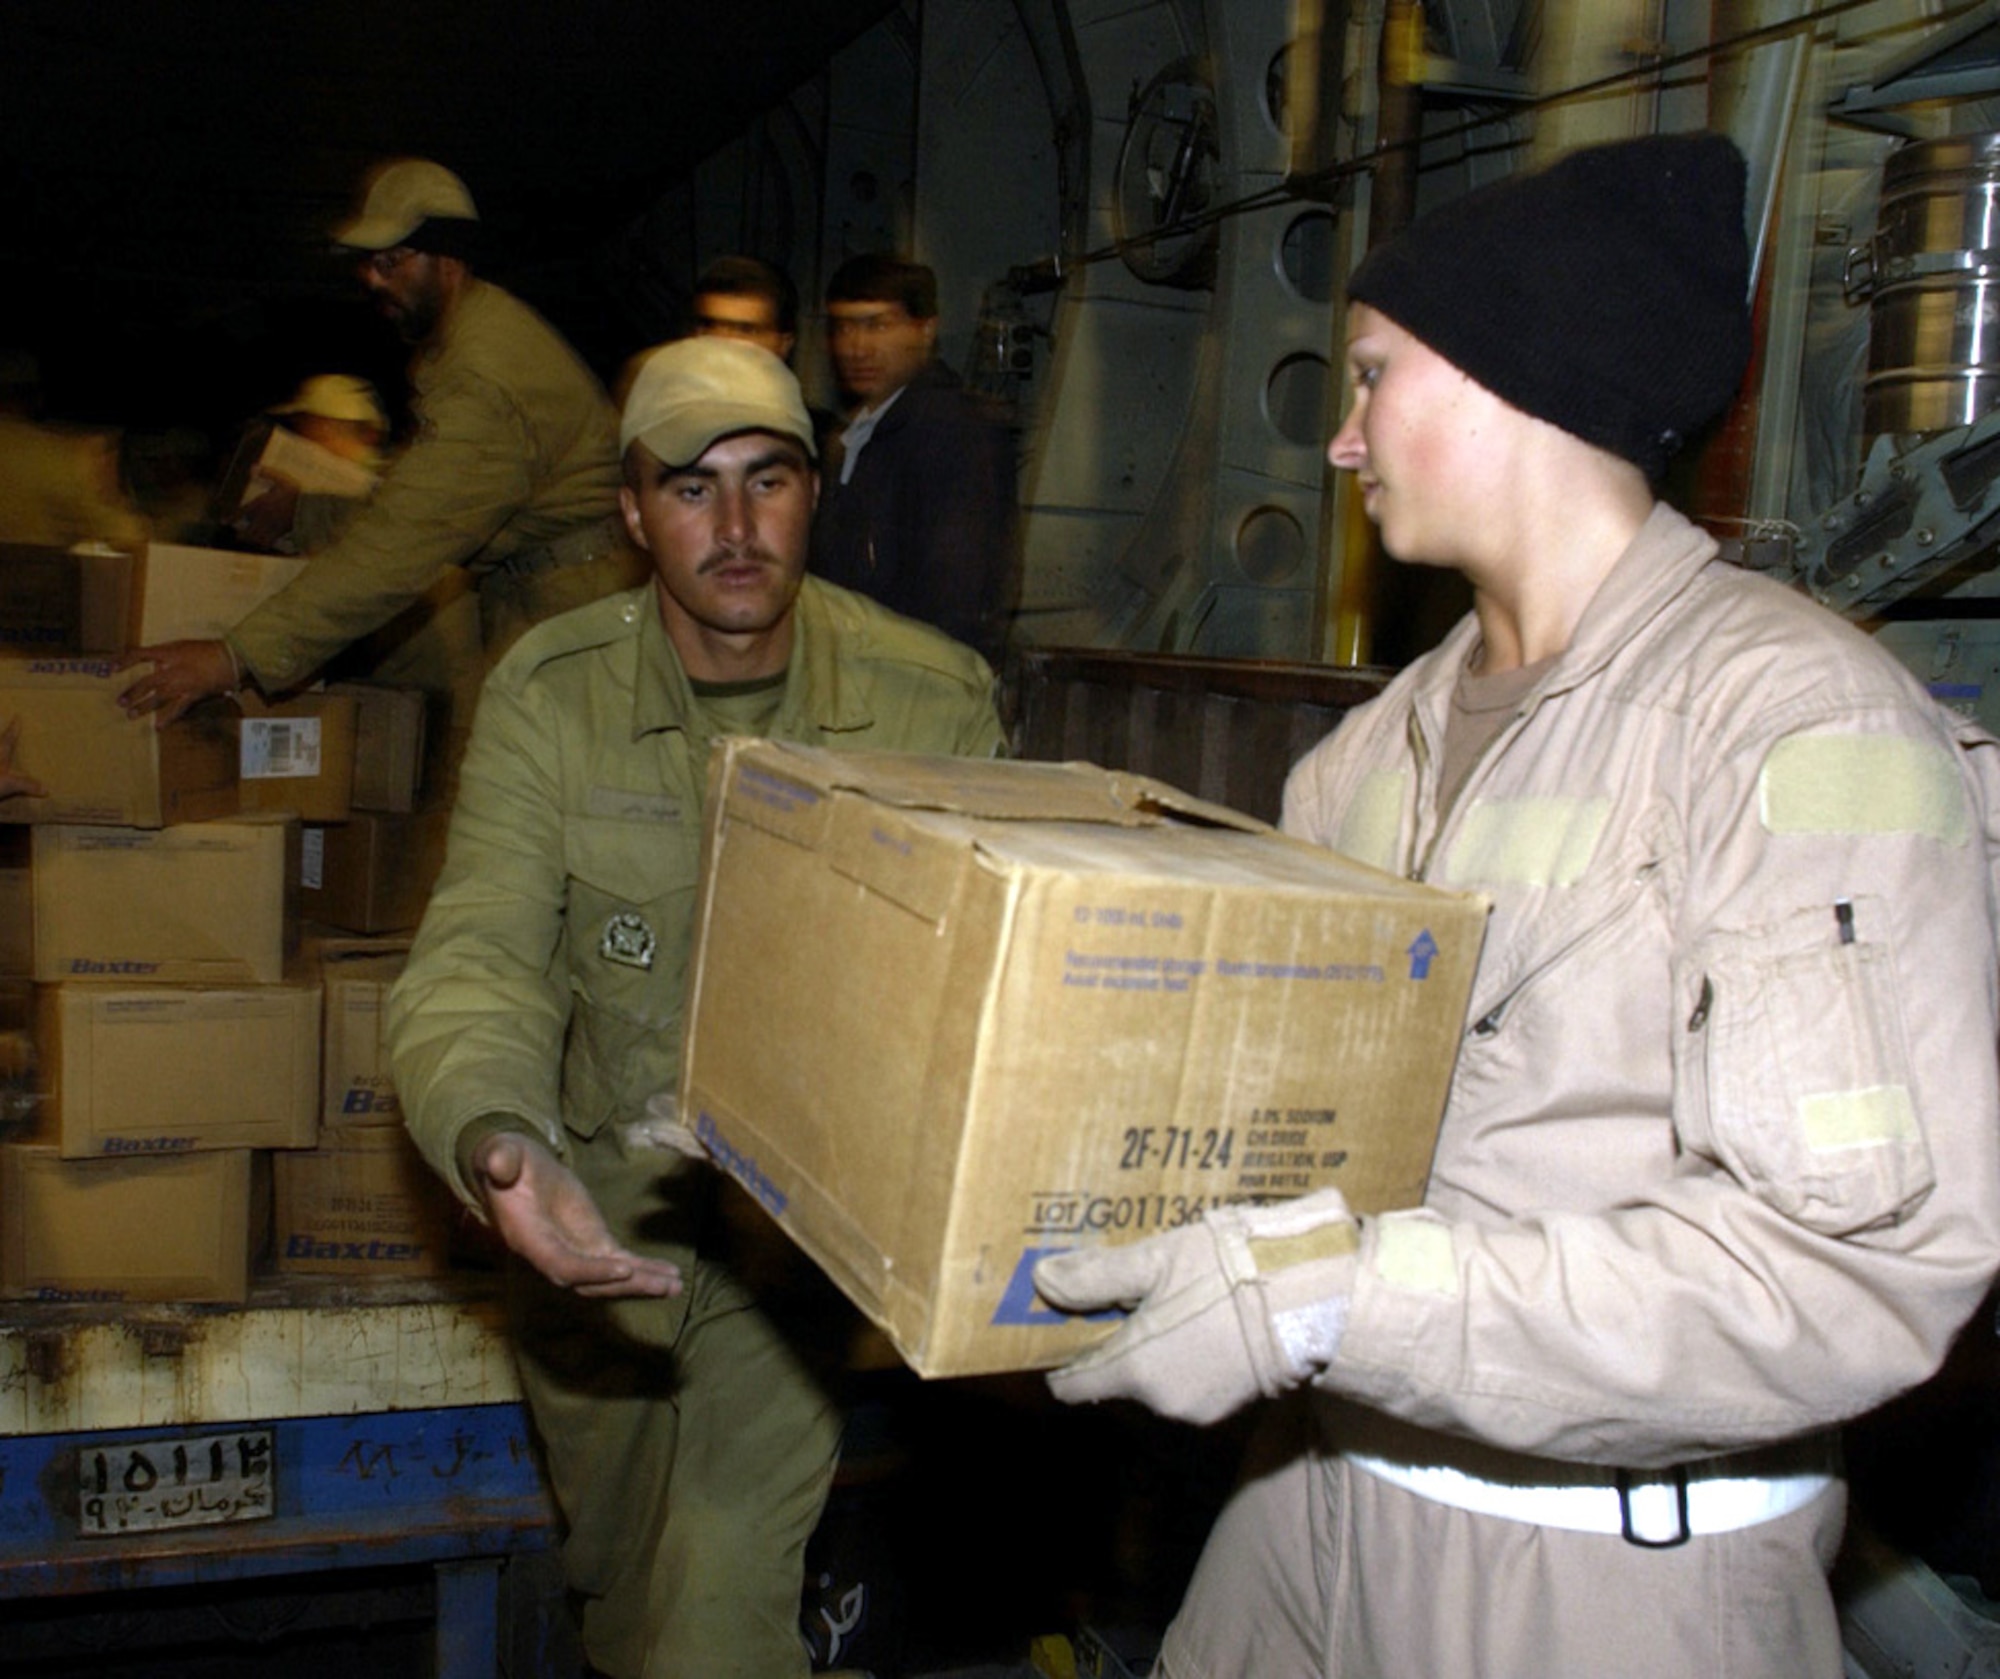 KERMAN, Iran -- Senior Airman Lindsey Whicker hands a box of water to an Iranian soldier here Dec. 28 as part of humanitarian relief efforts.  Whicker is assigned to the 746th Expeditionary Airlift Squadron and was part of a C-130 Hercules crew which airlifted 20 pallets of humanitarian supplies to Iran after an earthquake destroyed the city of Bam.  (U.S. Air Force photo by Staff Sgt. Suzanne M. Jenkins)